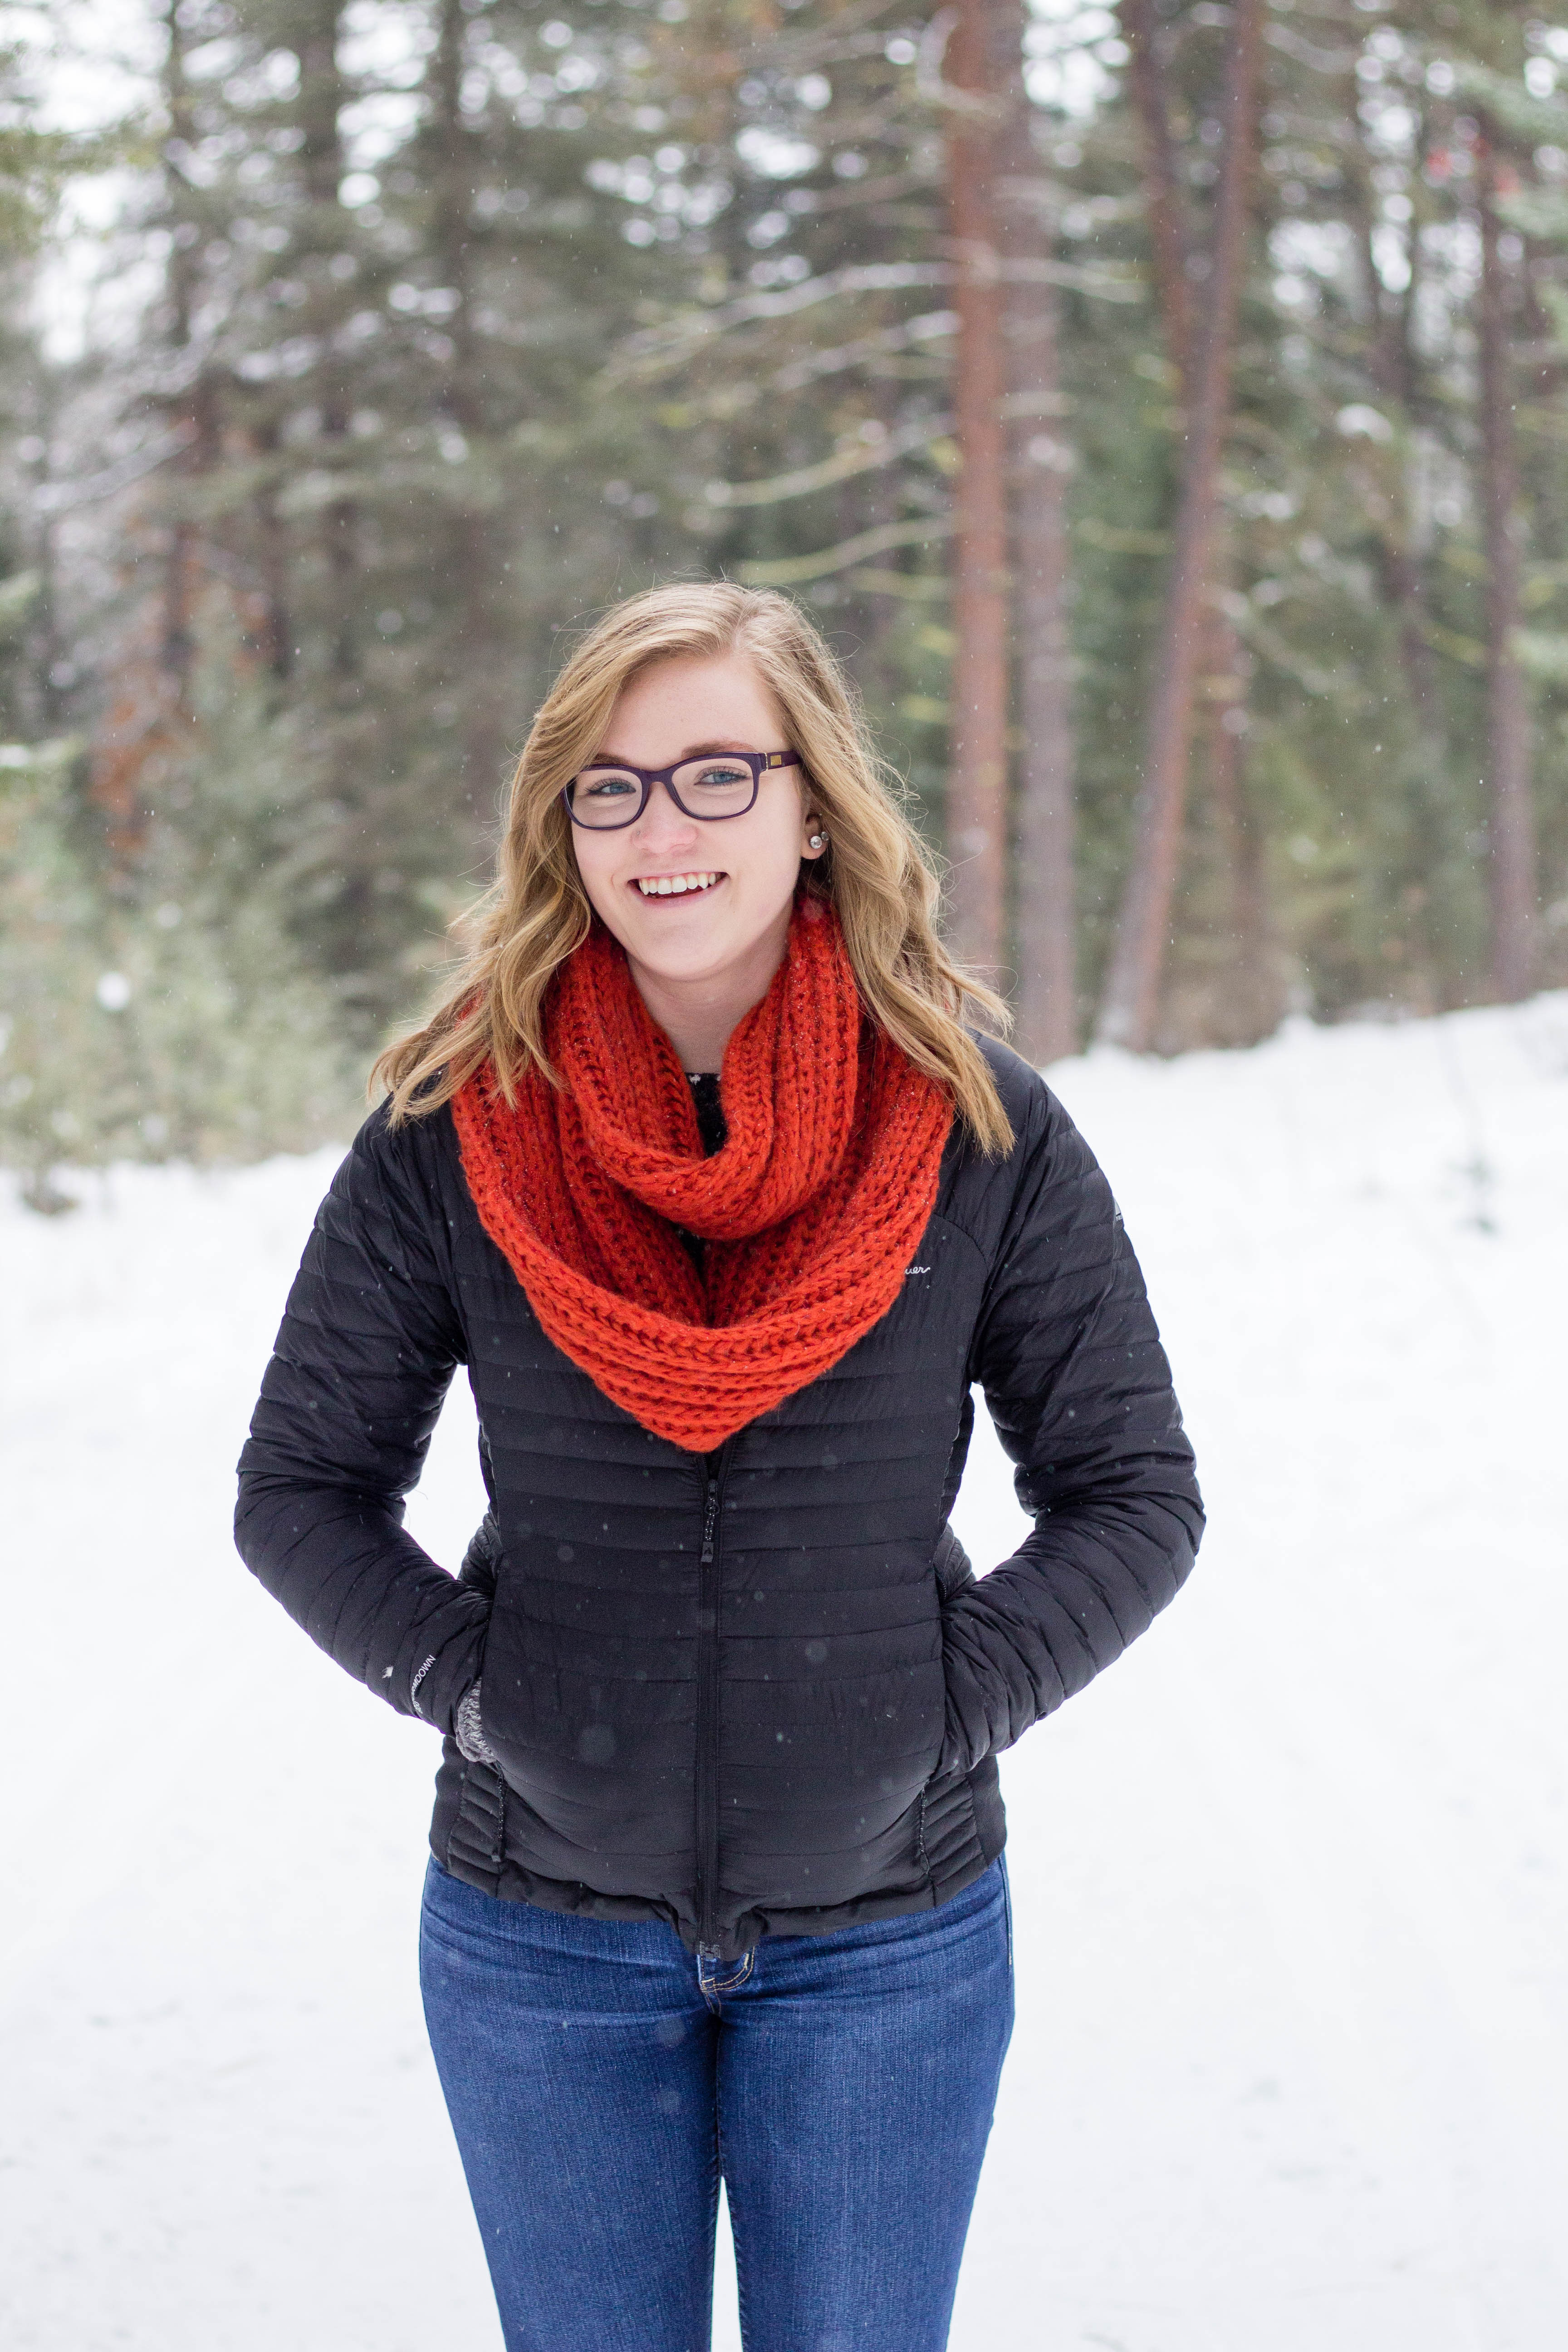 Headshot of Nicole Kirschten, a white woman with long, blonde hair wearing glasses, a red scarf, black coat, and jeans smiling at the camera.